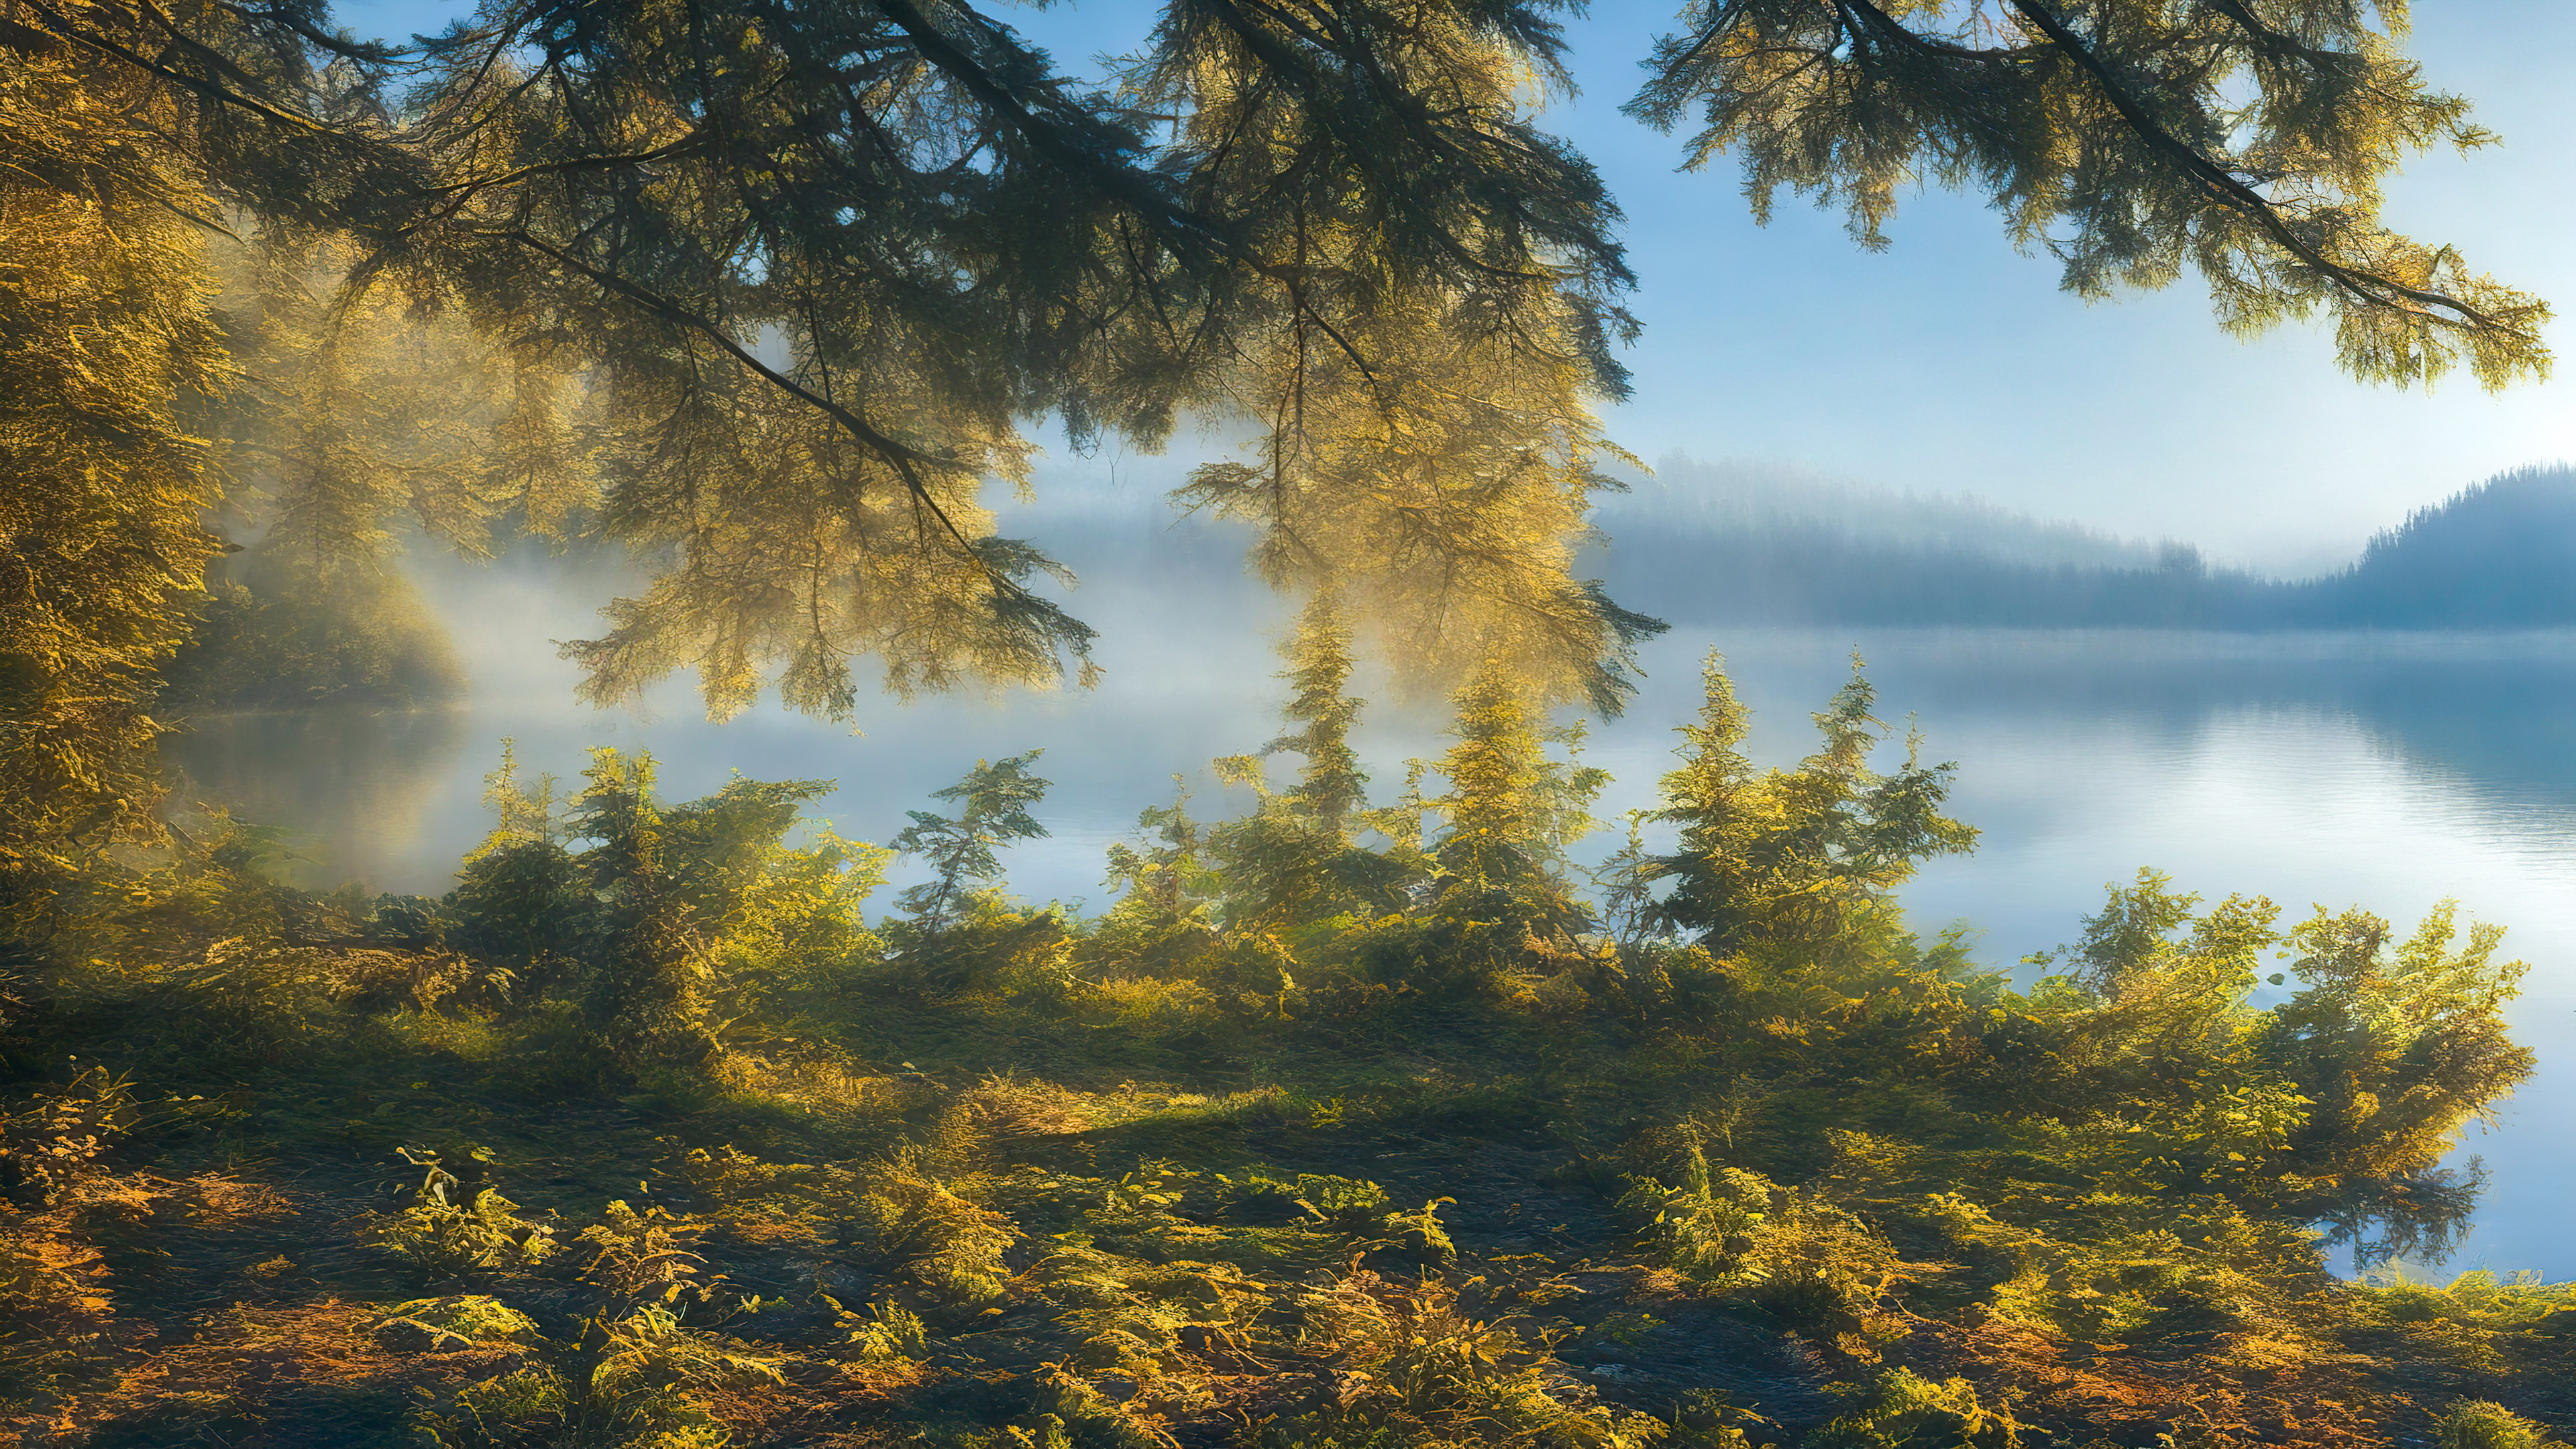 Witness the serenity of a lakeside scene at dawn, with mist rising from the water and the first light of day, in our 4K desktop wallpaper collection.